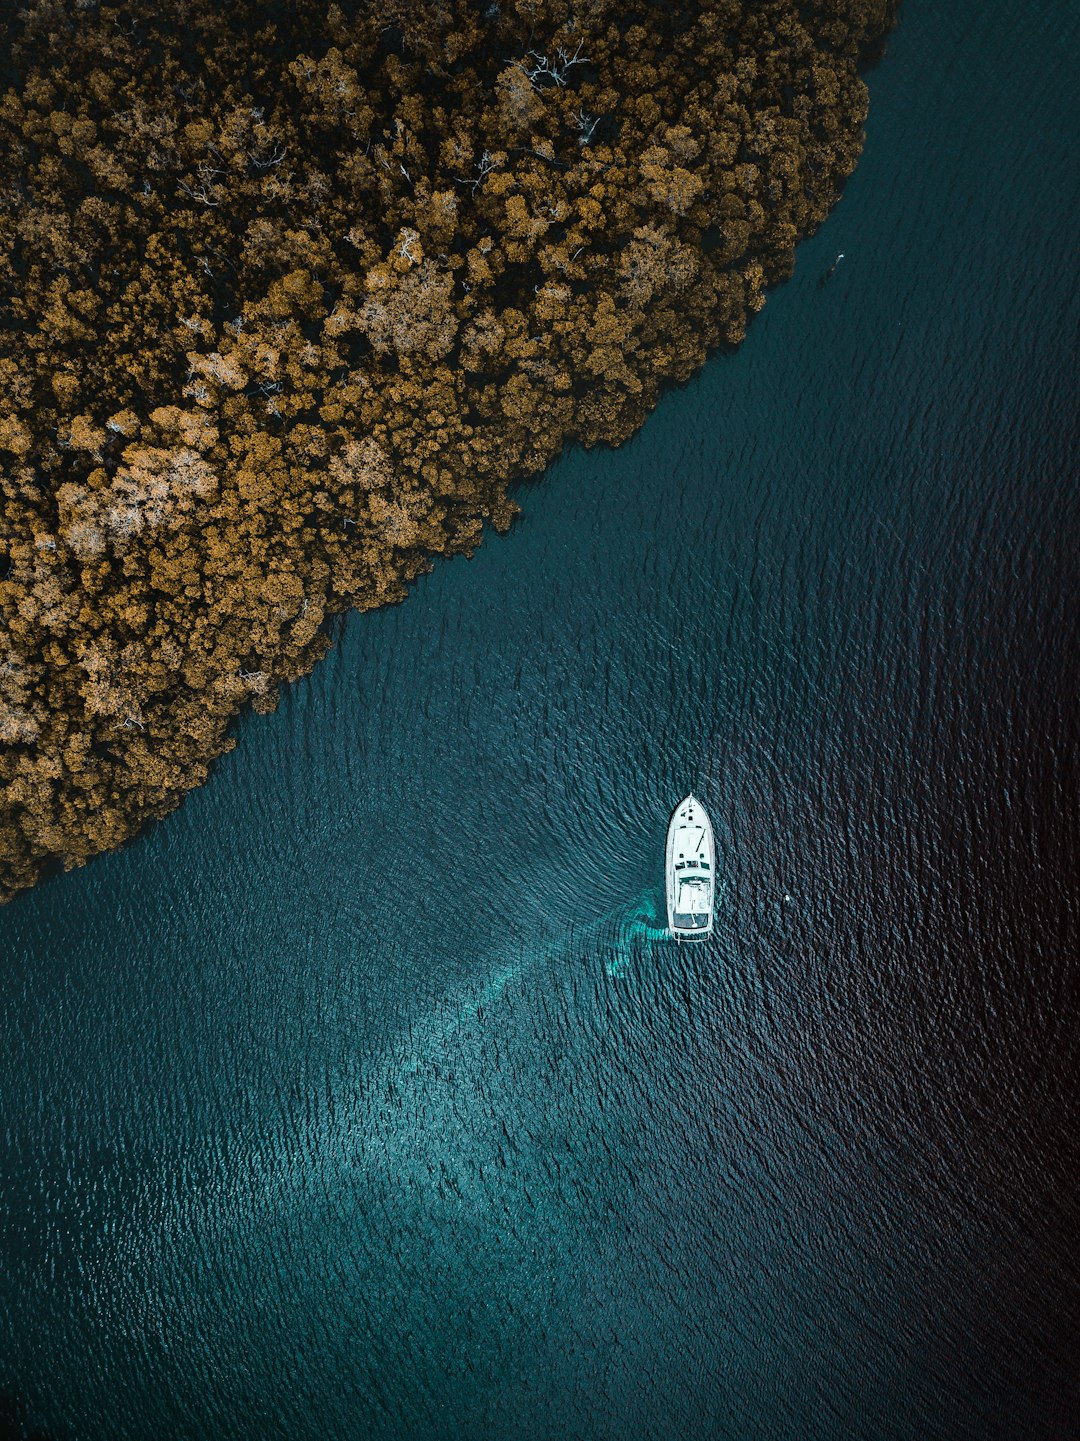 bird's-eye view of boat on body of water